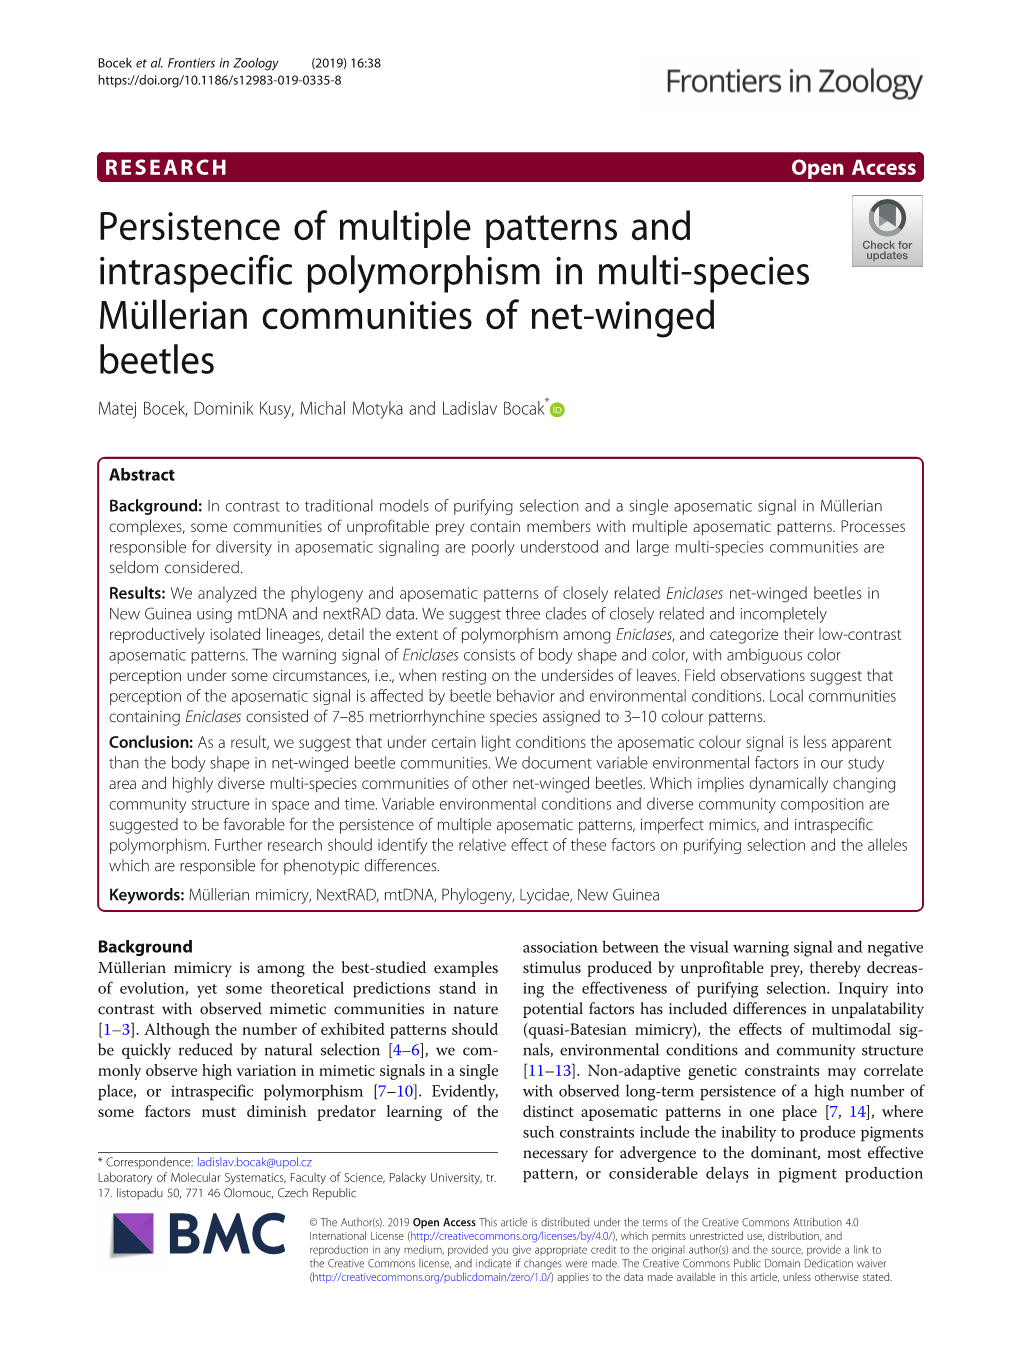 Persistence of Multiple Patterns and Intraspecific Polymorphism in Multi